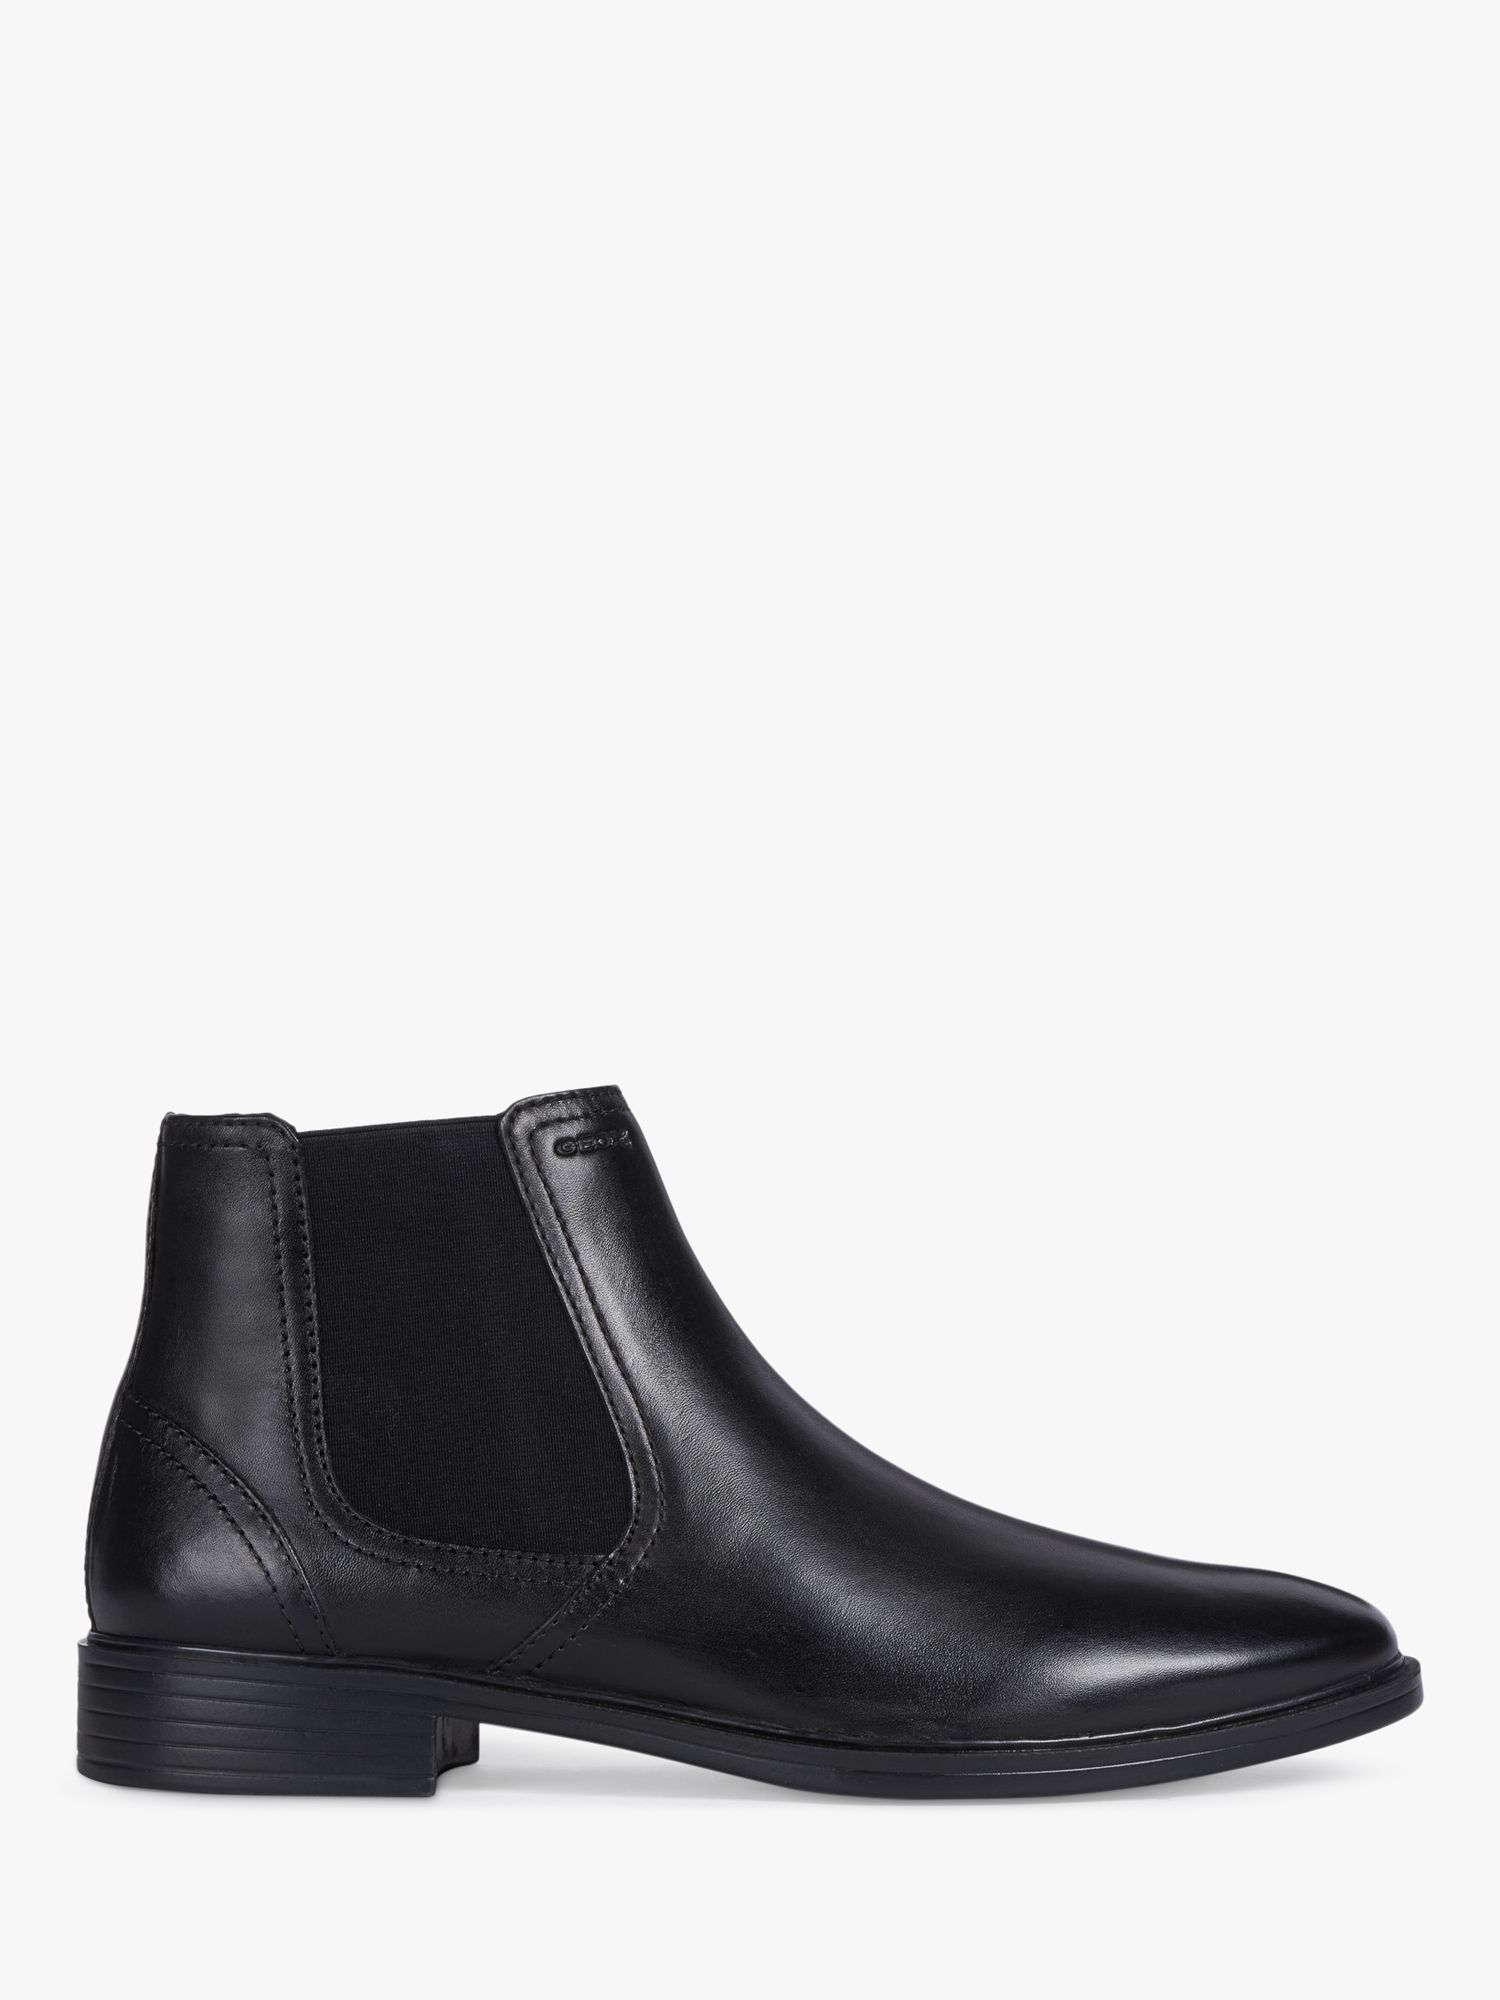 læbe announcer sig selv Geox Gladwin Leather Chelsea Boots, Black